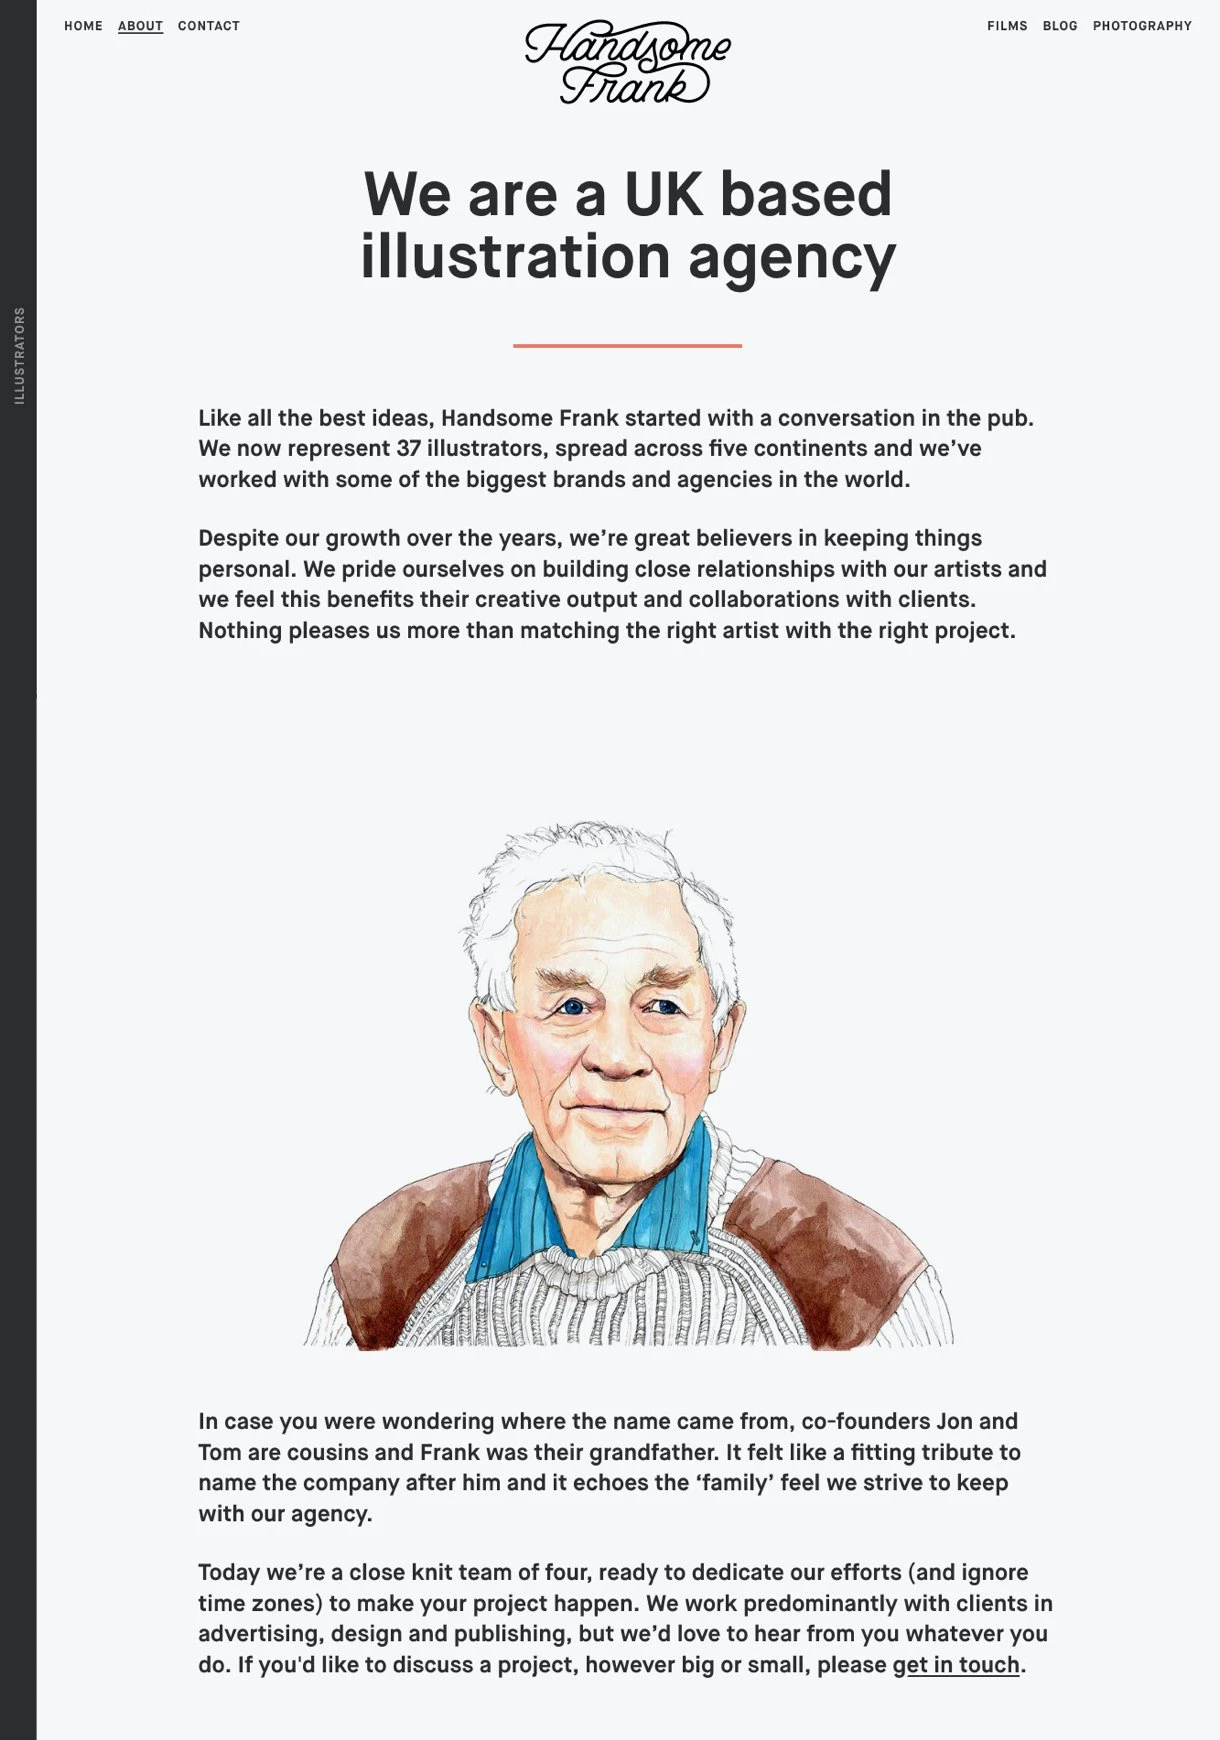 Handsome Frank agency About page white background portrait illustration